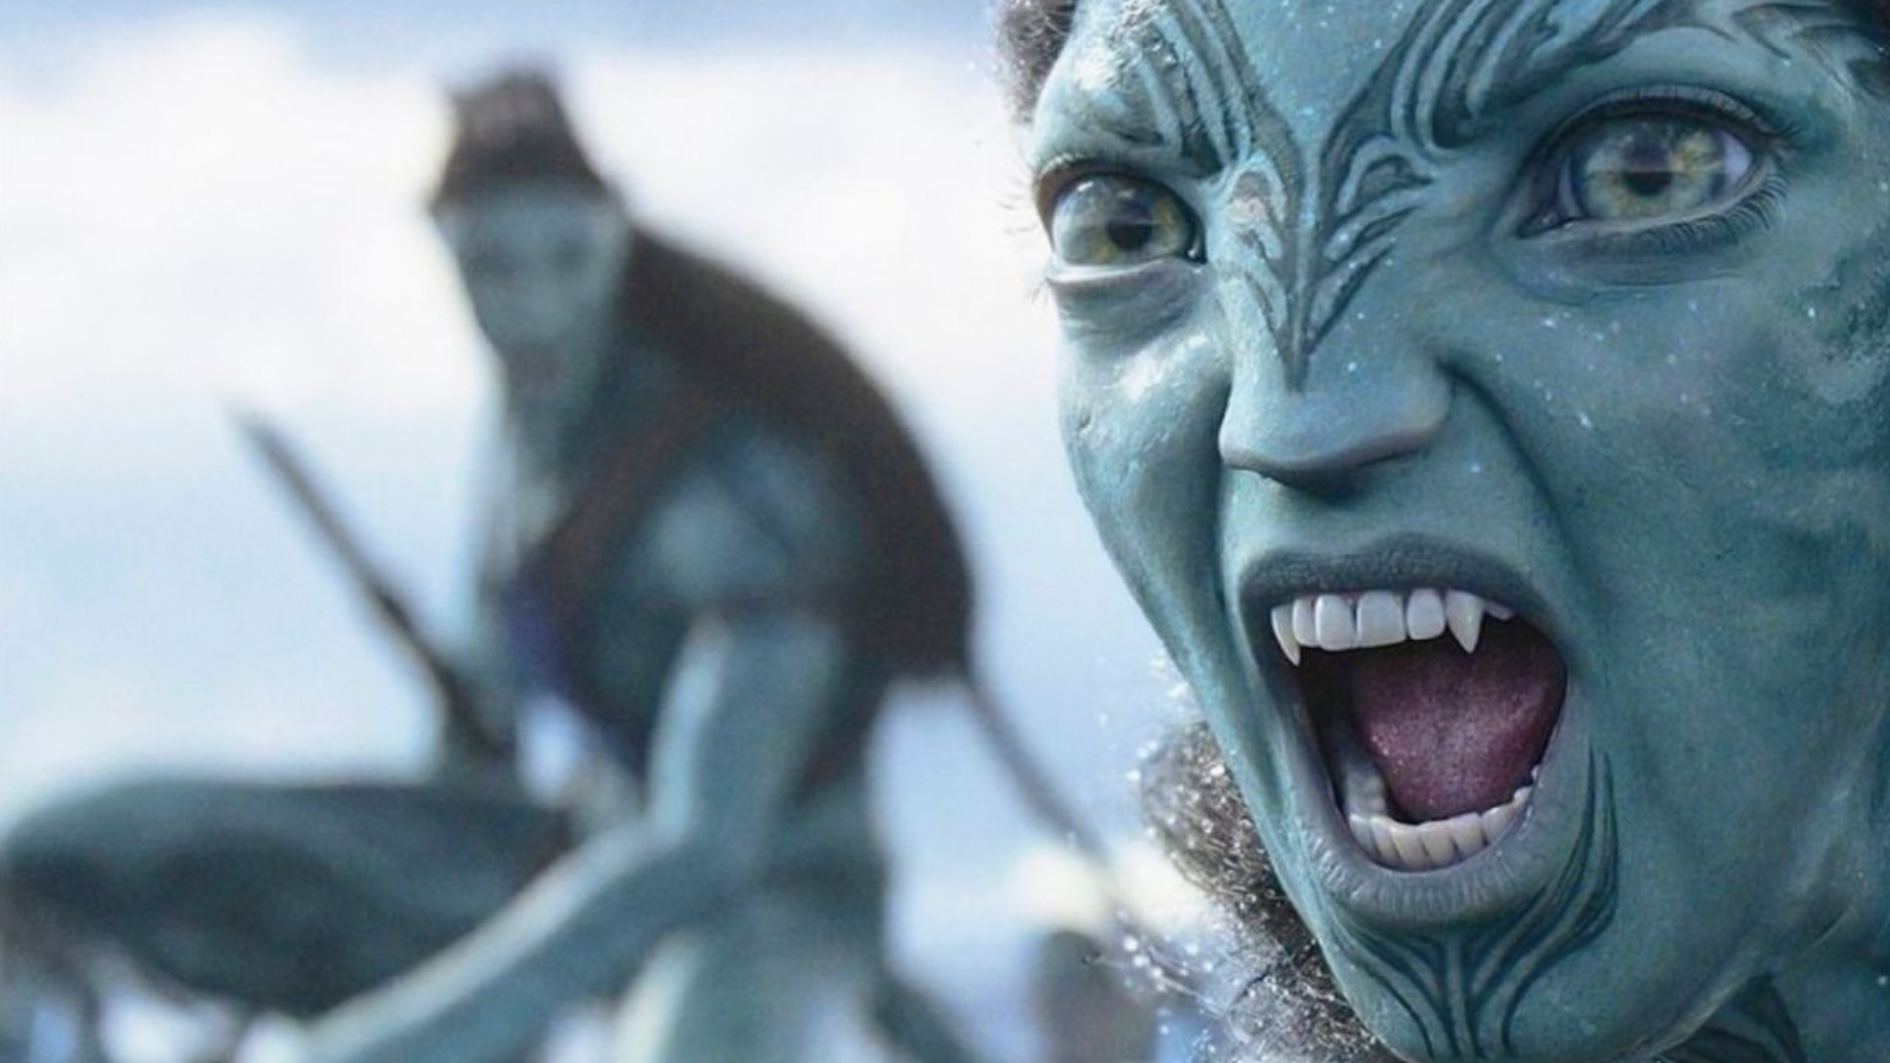 Avatar 2 under pressure to win big at box office after racking up